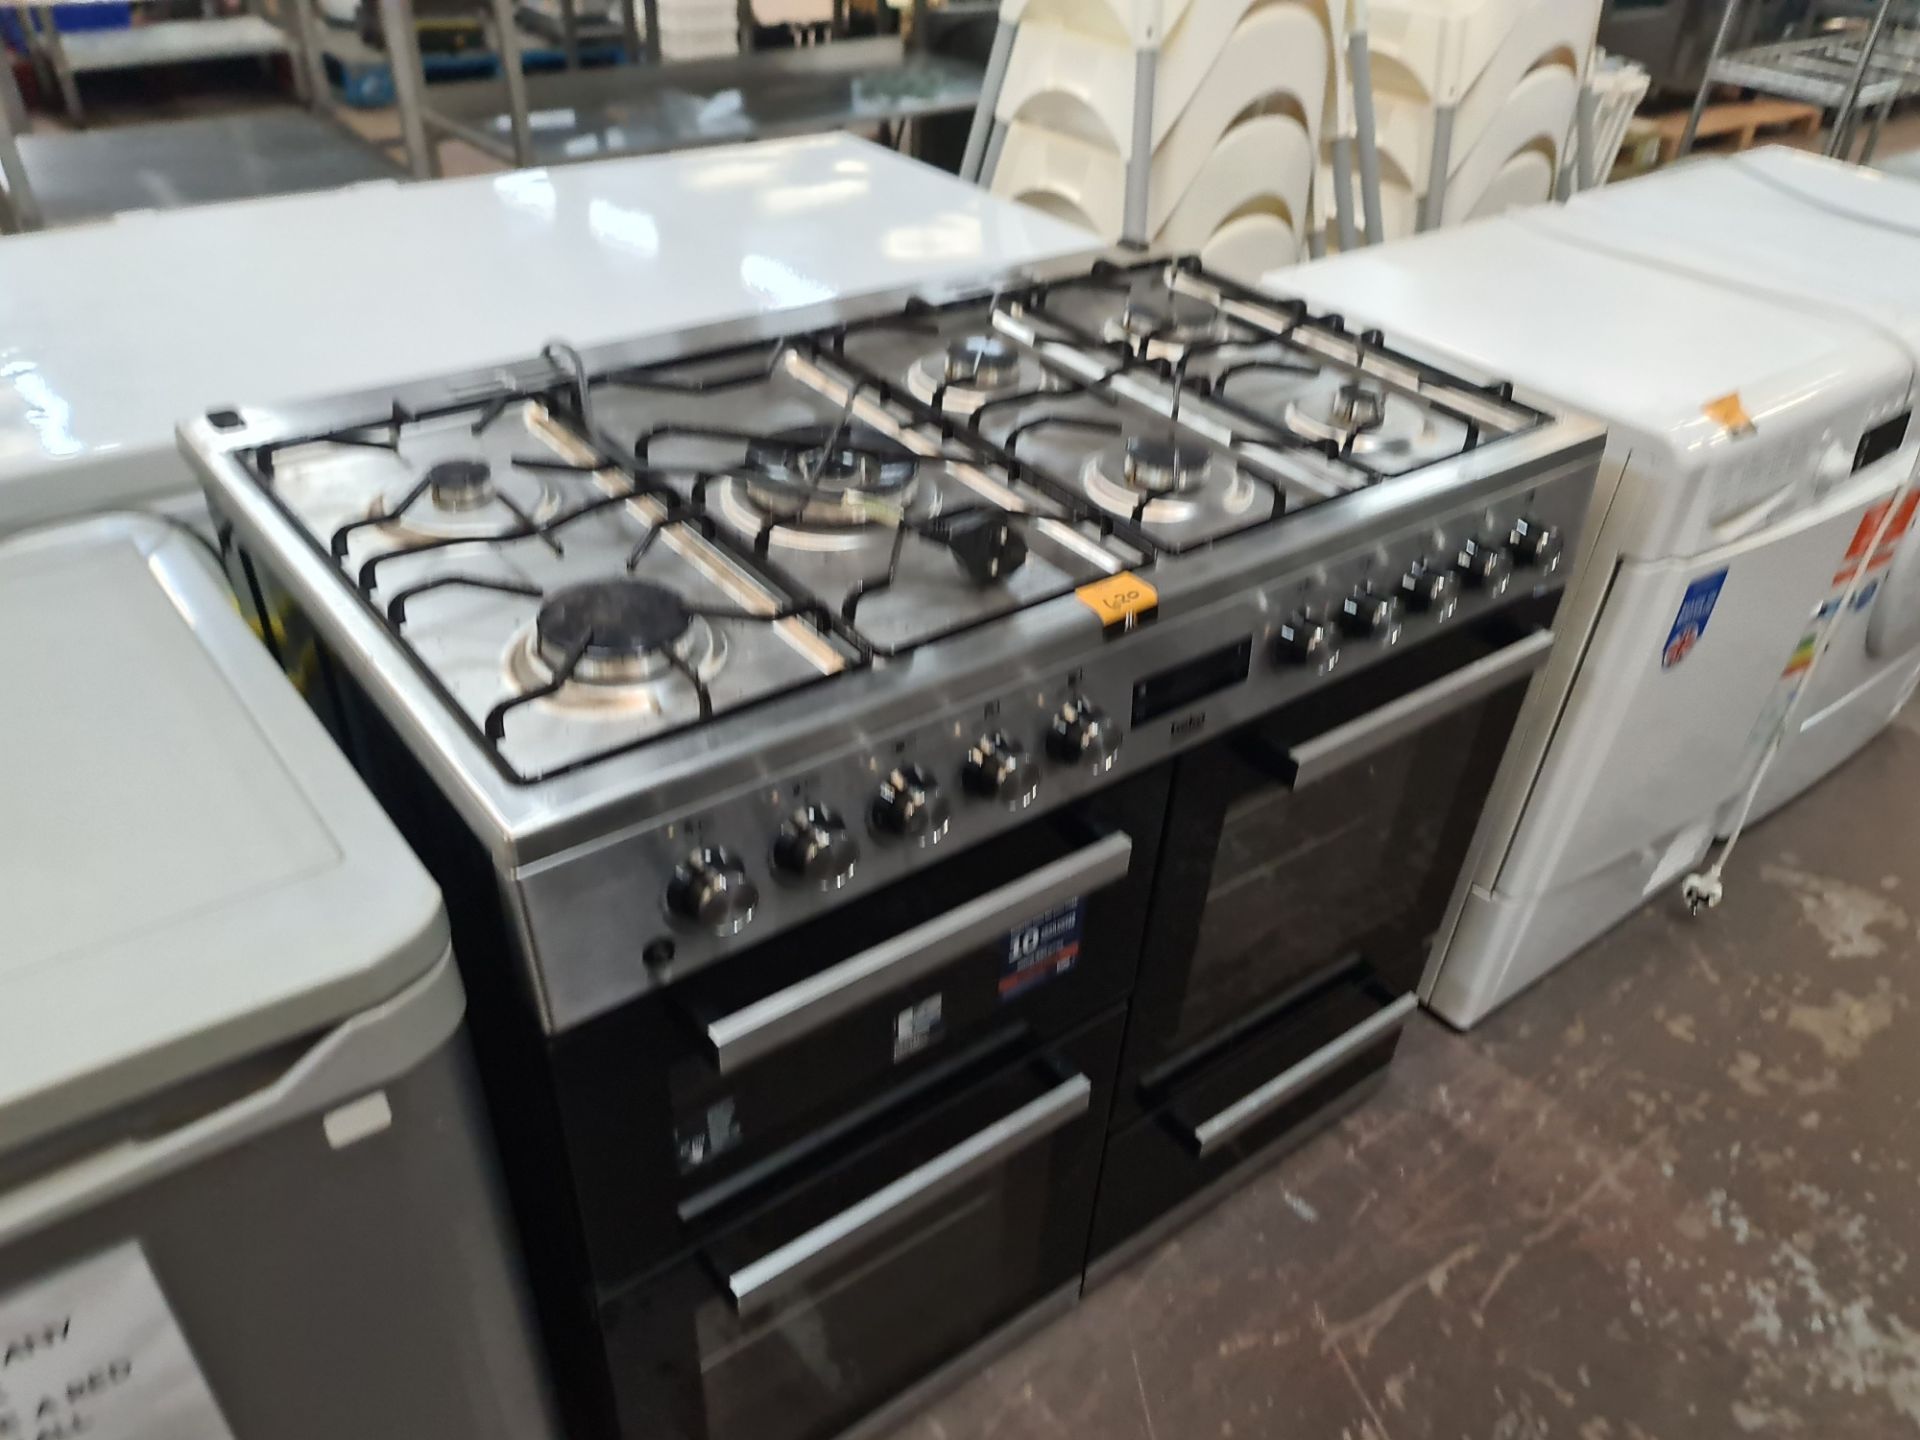 Beko large range oven with a total of 7 hobs